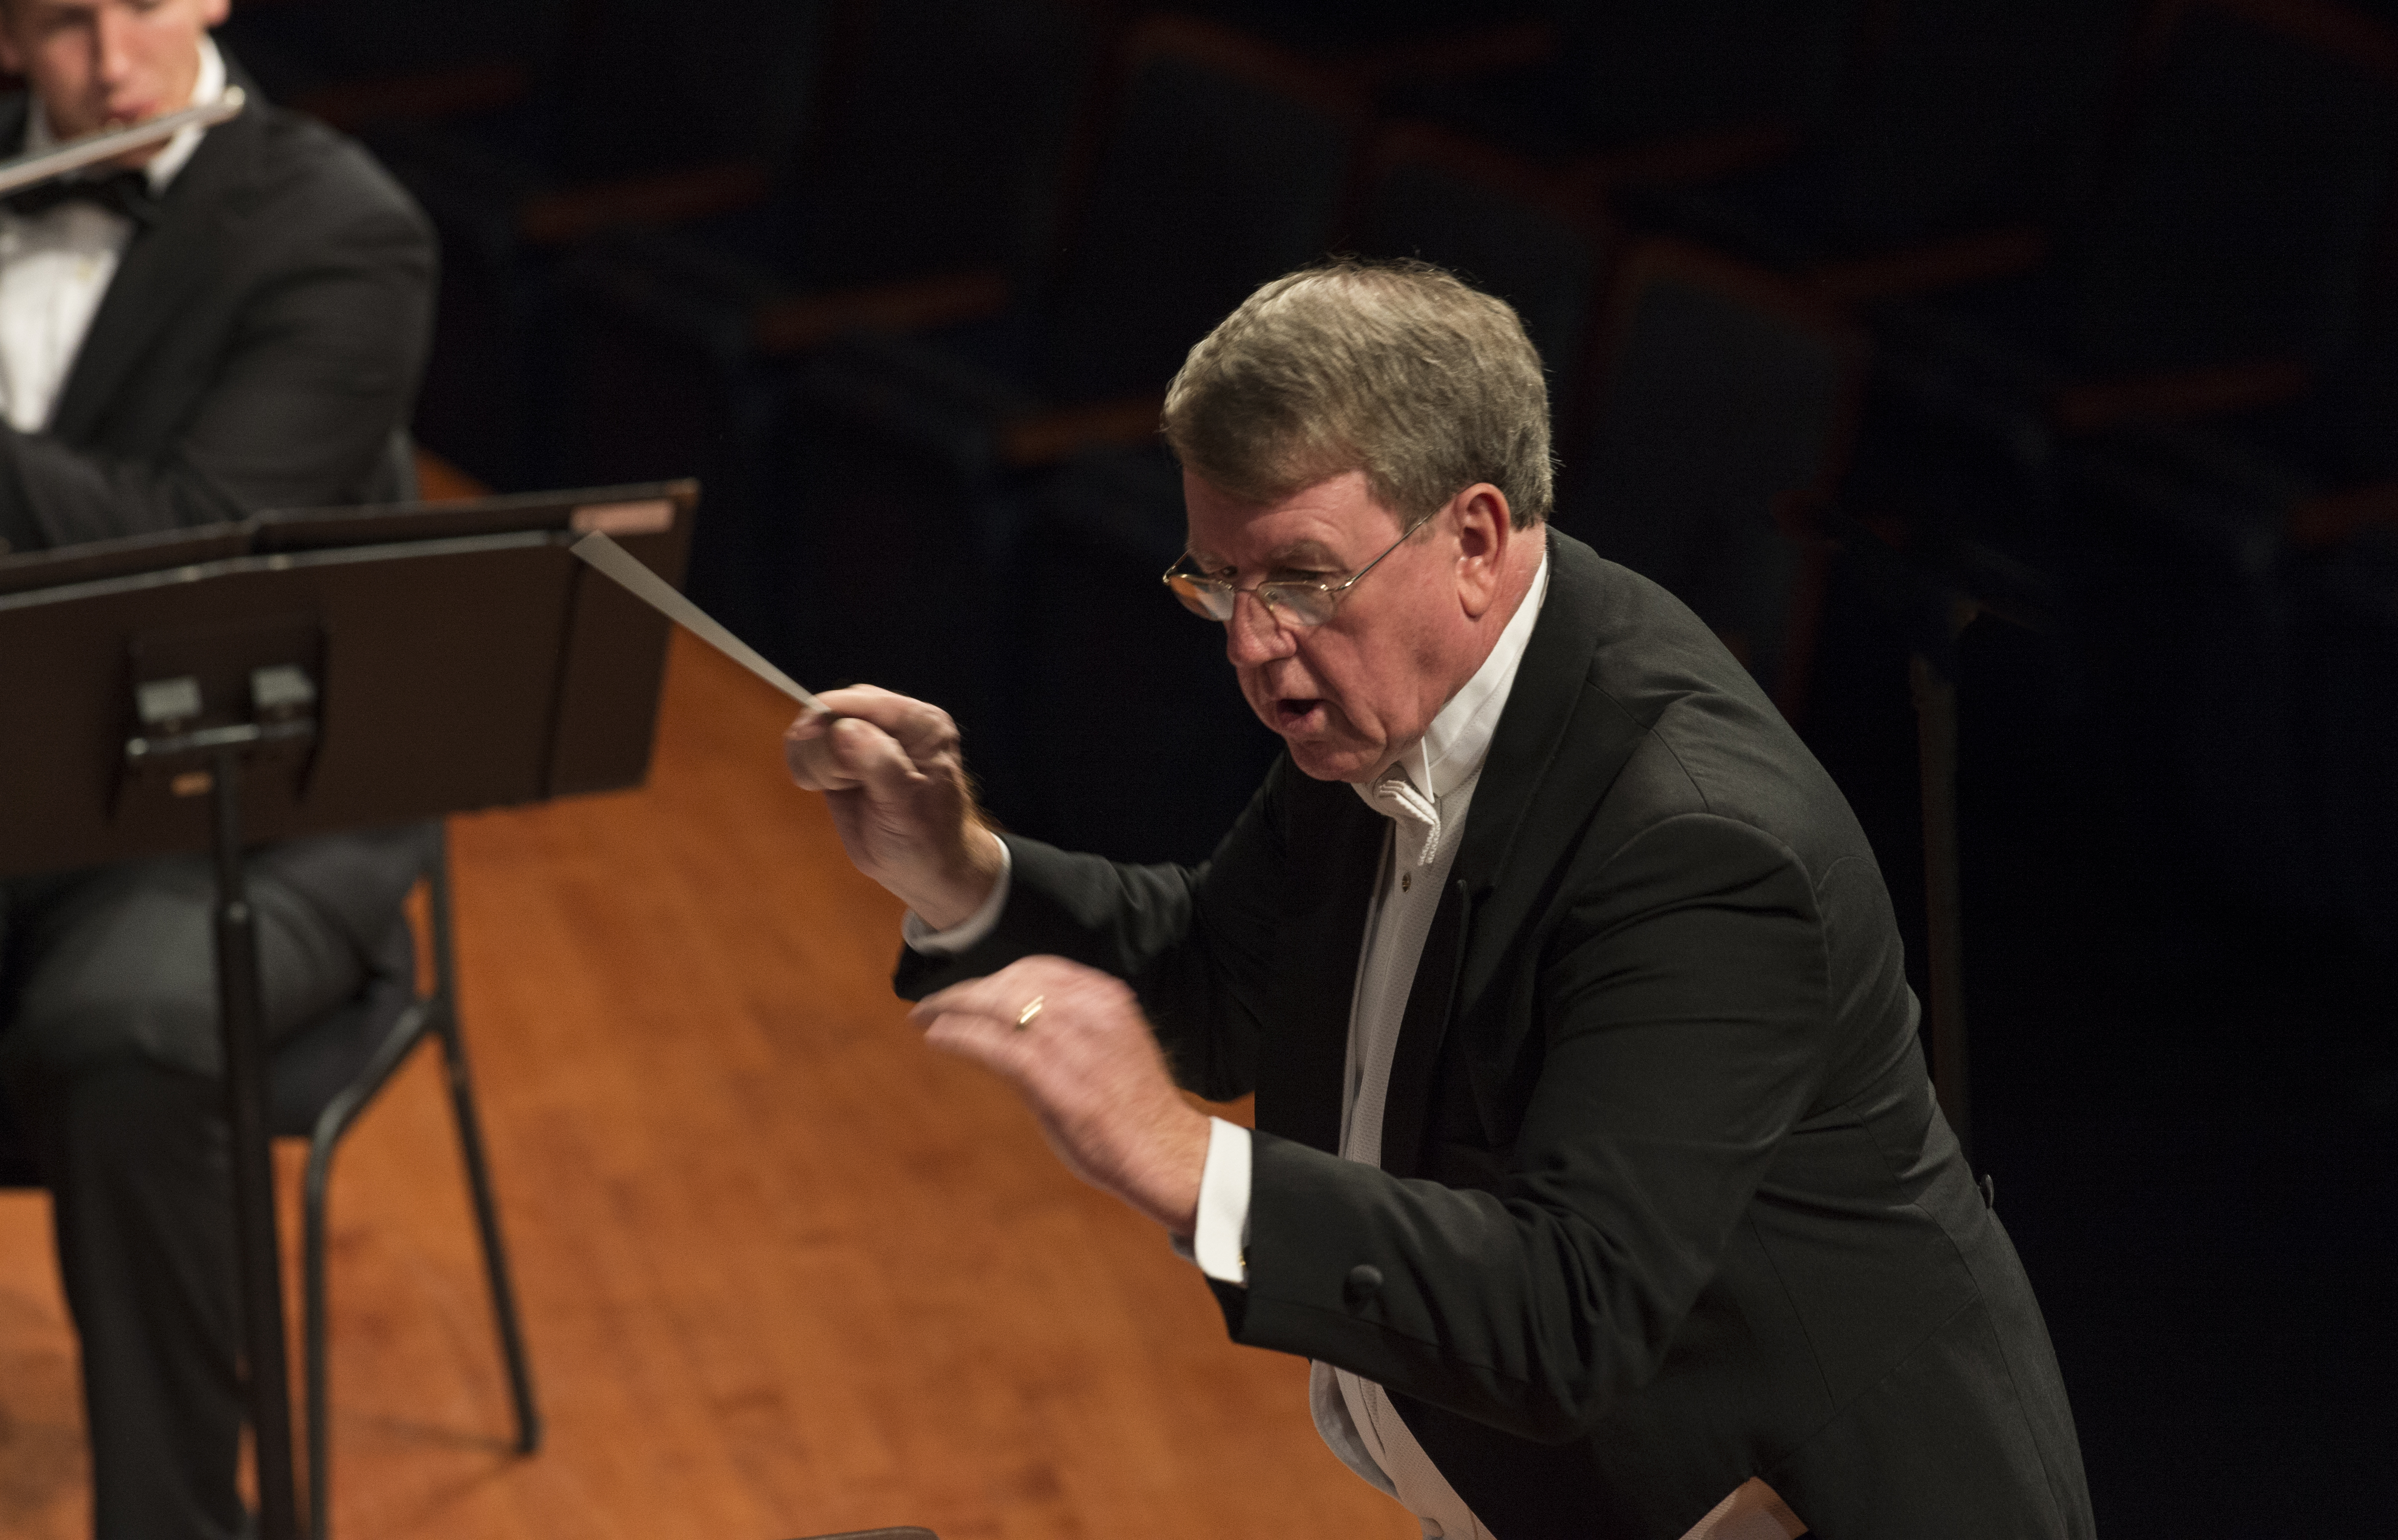 The UNT Symphonic Band brings North Texas a celebration of Russian Culture